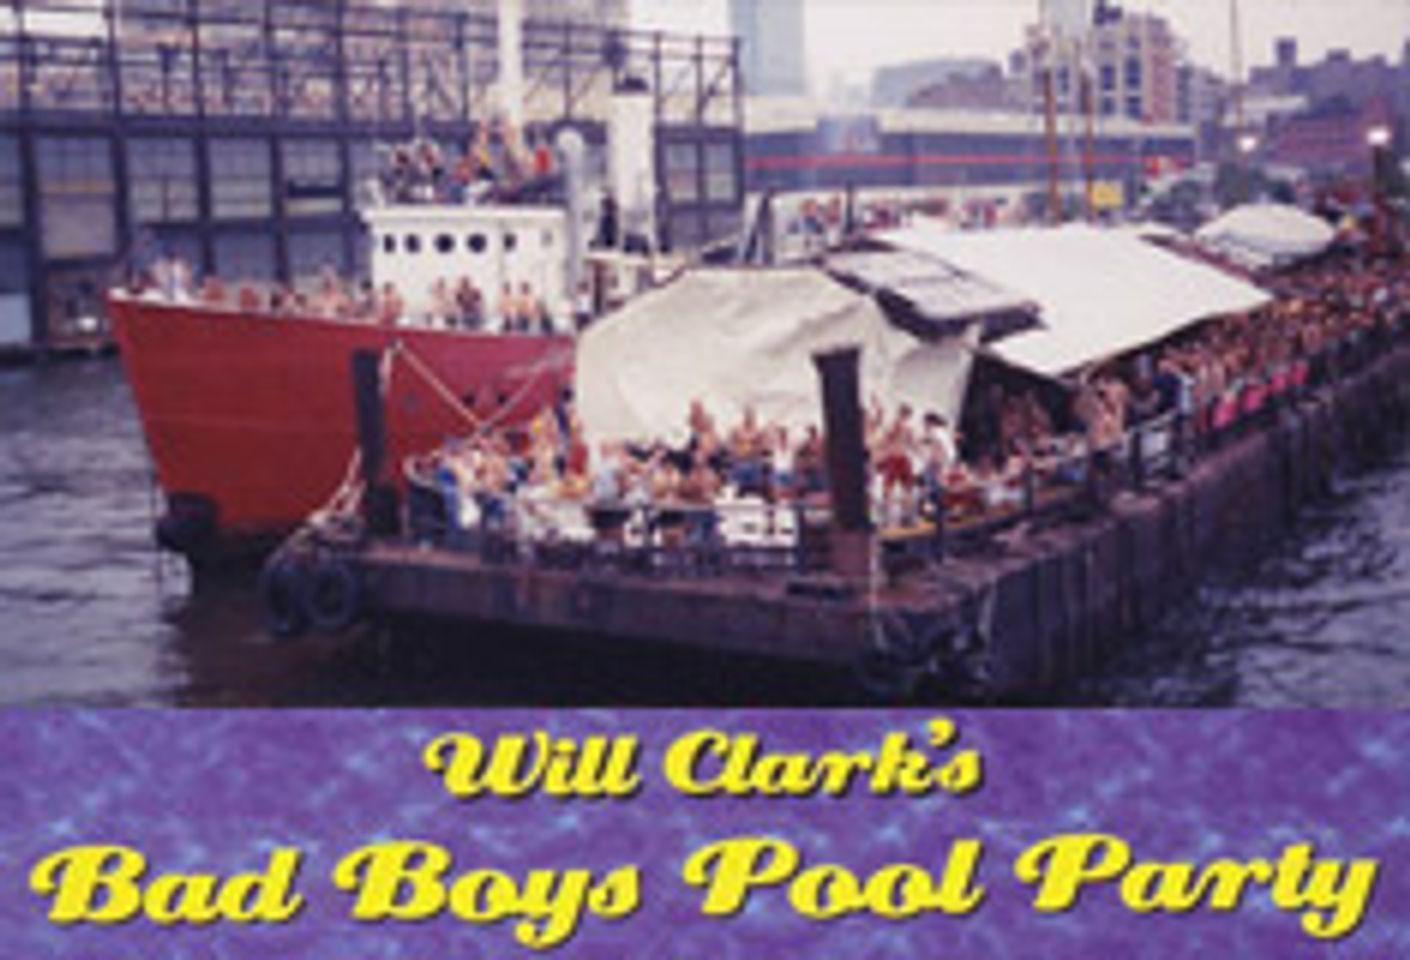 Will Clark's 'Bad Boys on the Hudson' Slated for July in NYC